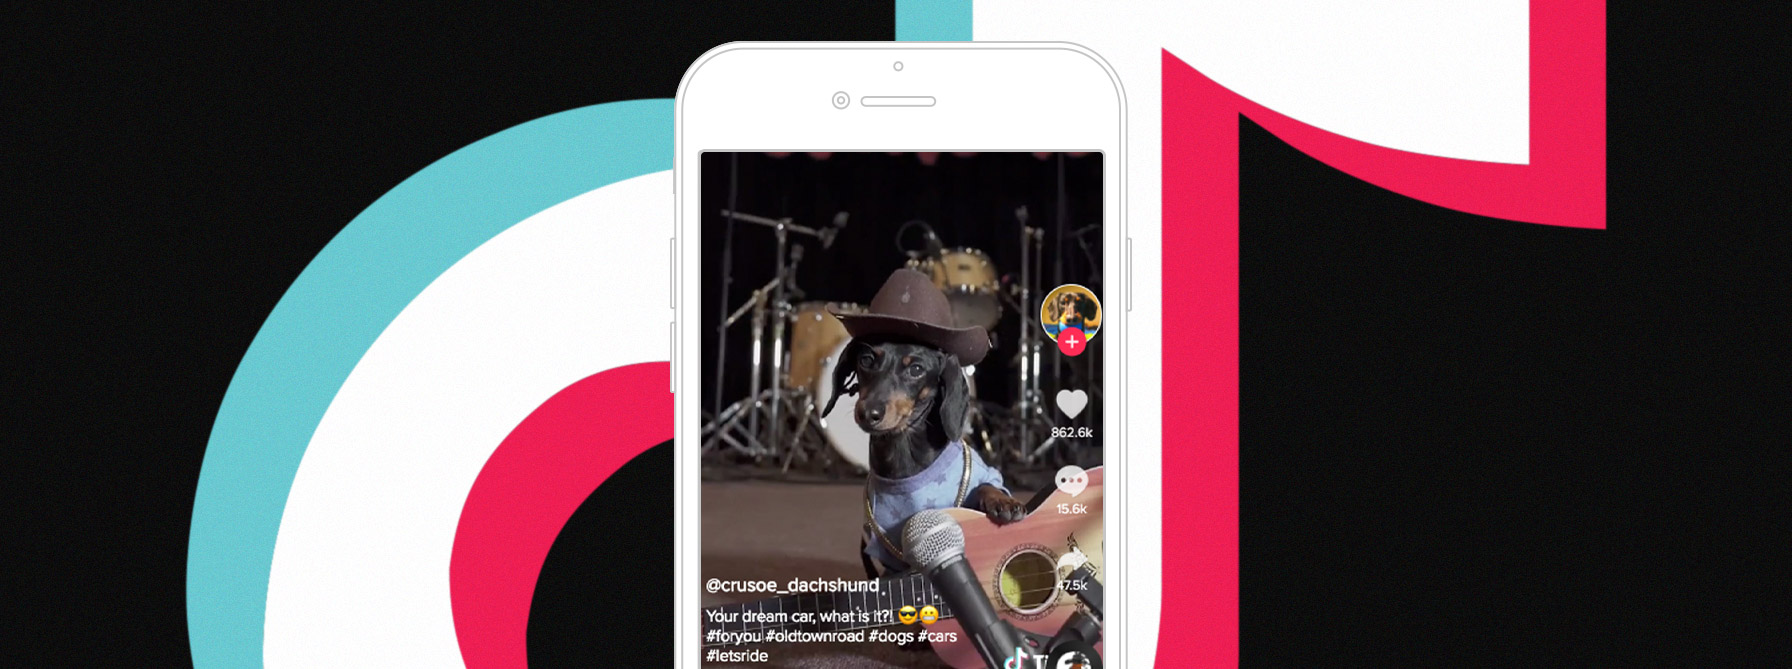 Is TikTok the right fit for finance brands?